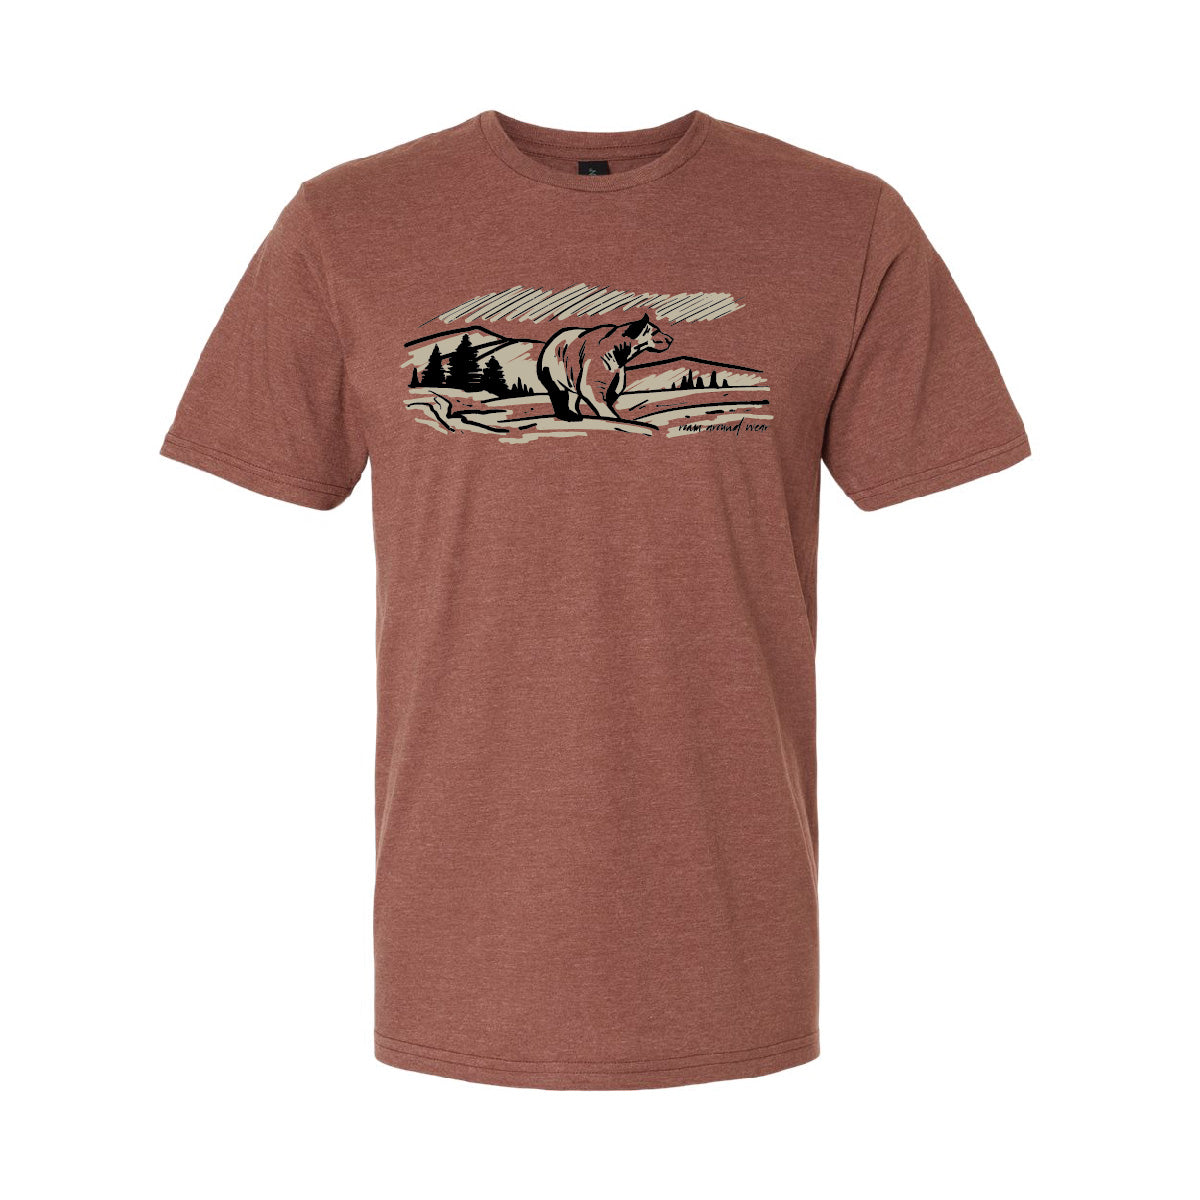 Bear tee shirt. Outdoor bear shirt. Wyoming t-shirt. Unisex shirt. Roam Around Wear is a Wyoming t-shirt company based out of Gillette, Wyoming